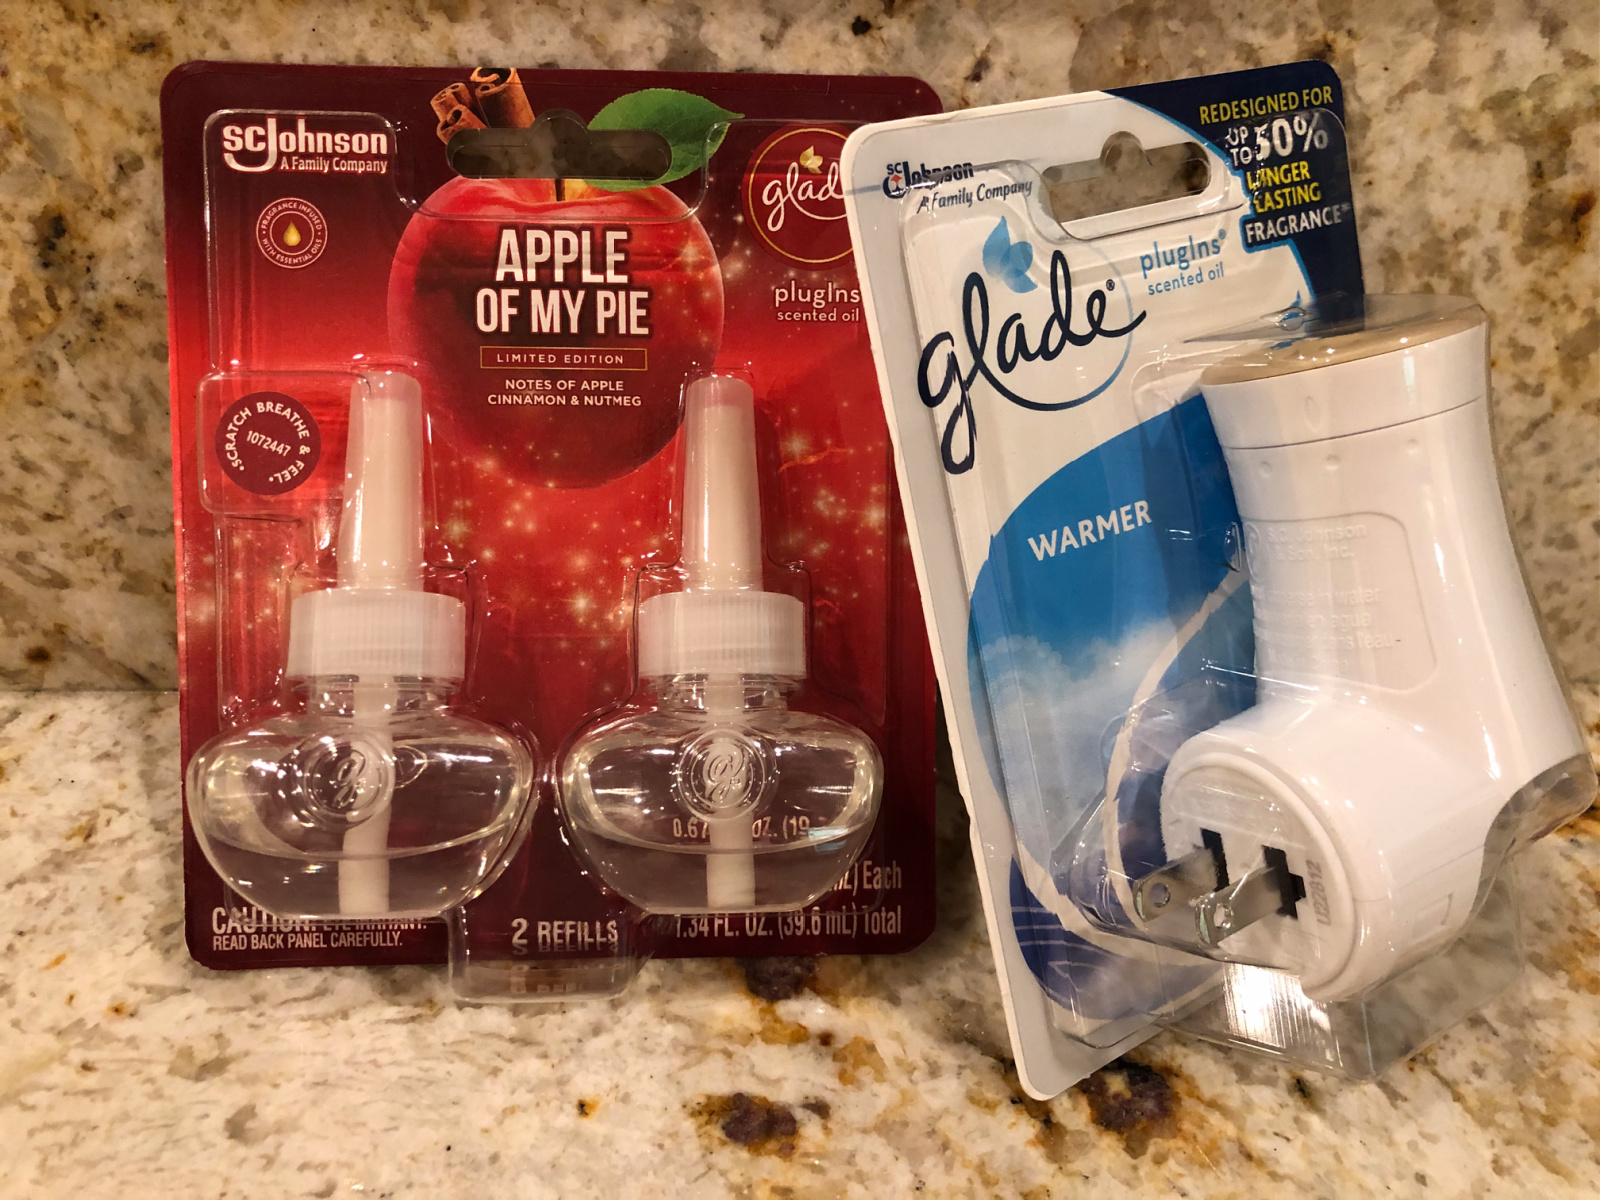 Look For Glade® Limited Edition Fall Collection Products At Publix + Get Fantastic Savings On Glade® PlugIns® Scented Oil Refills on I Heart Publix 1